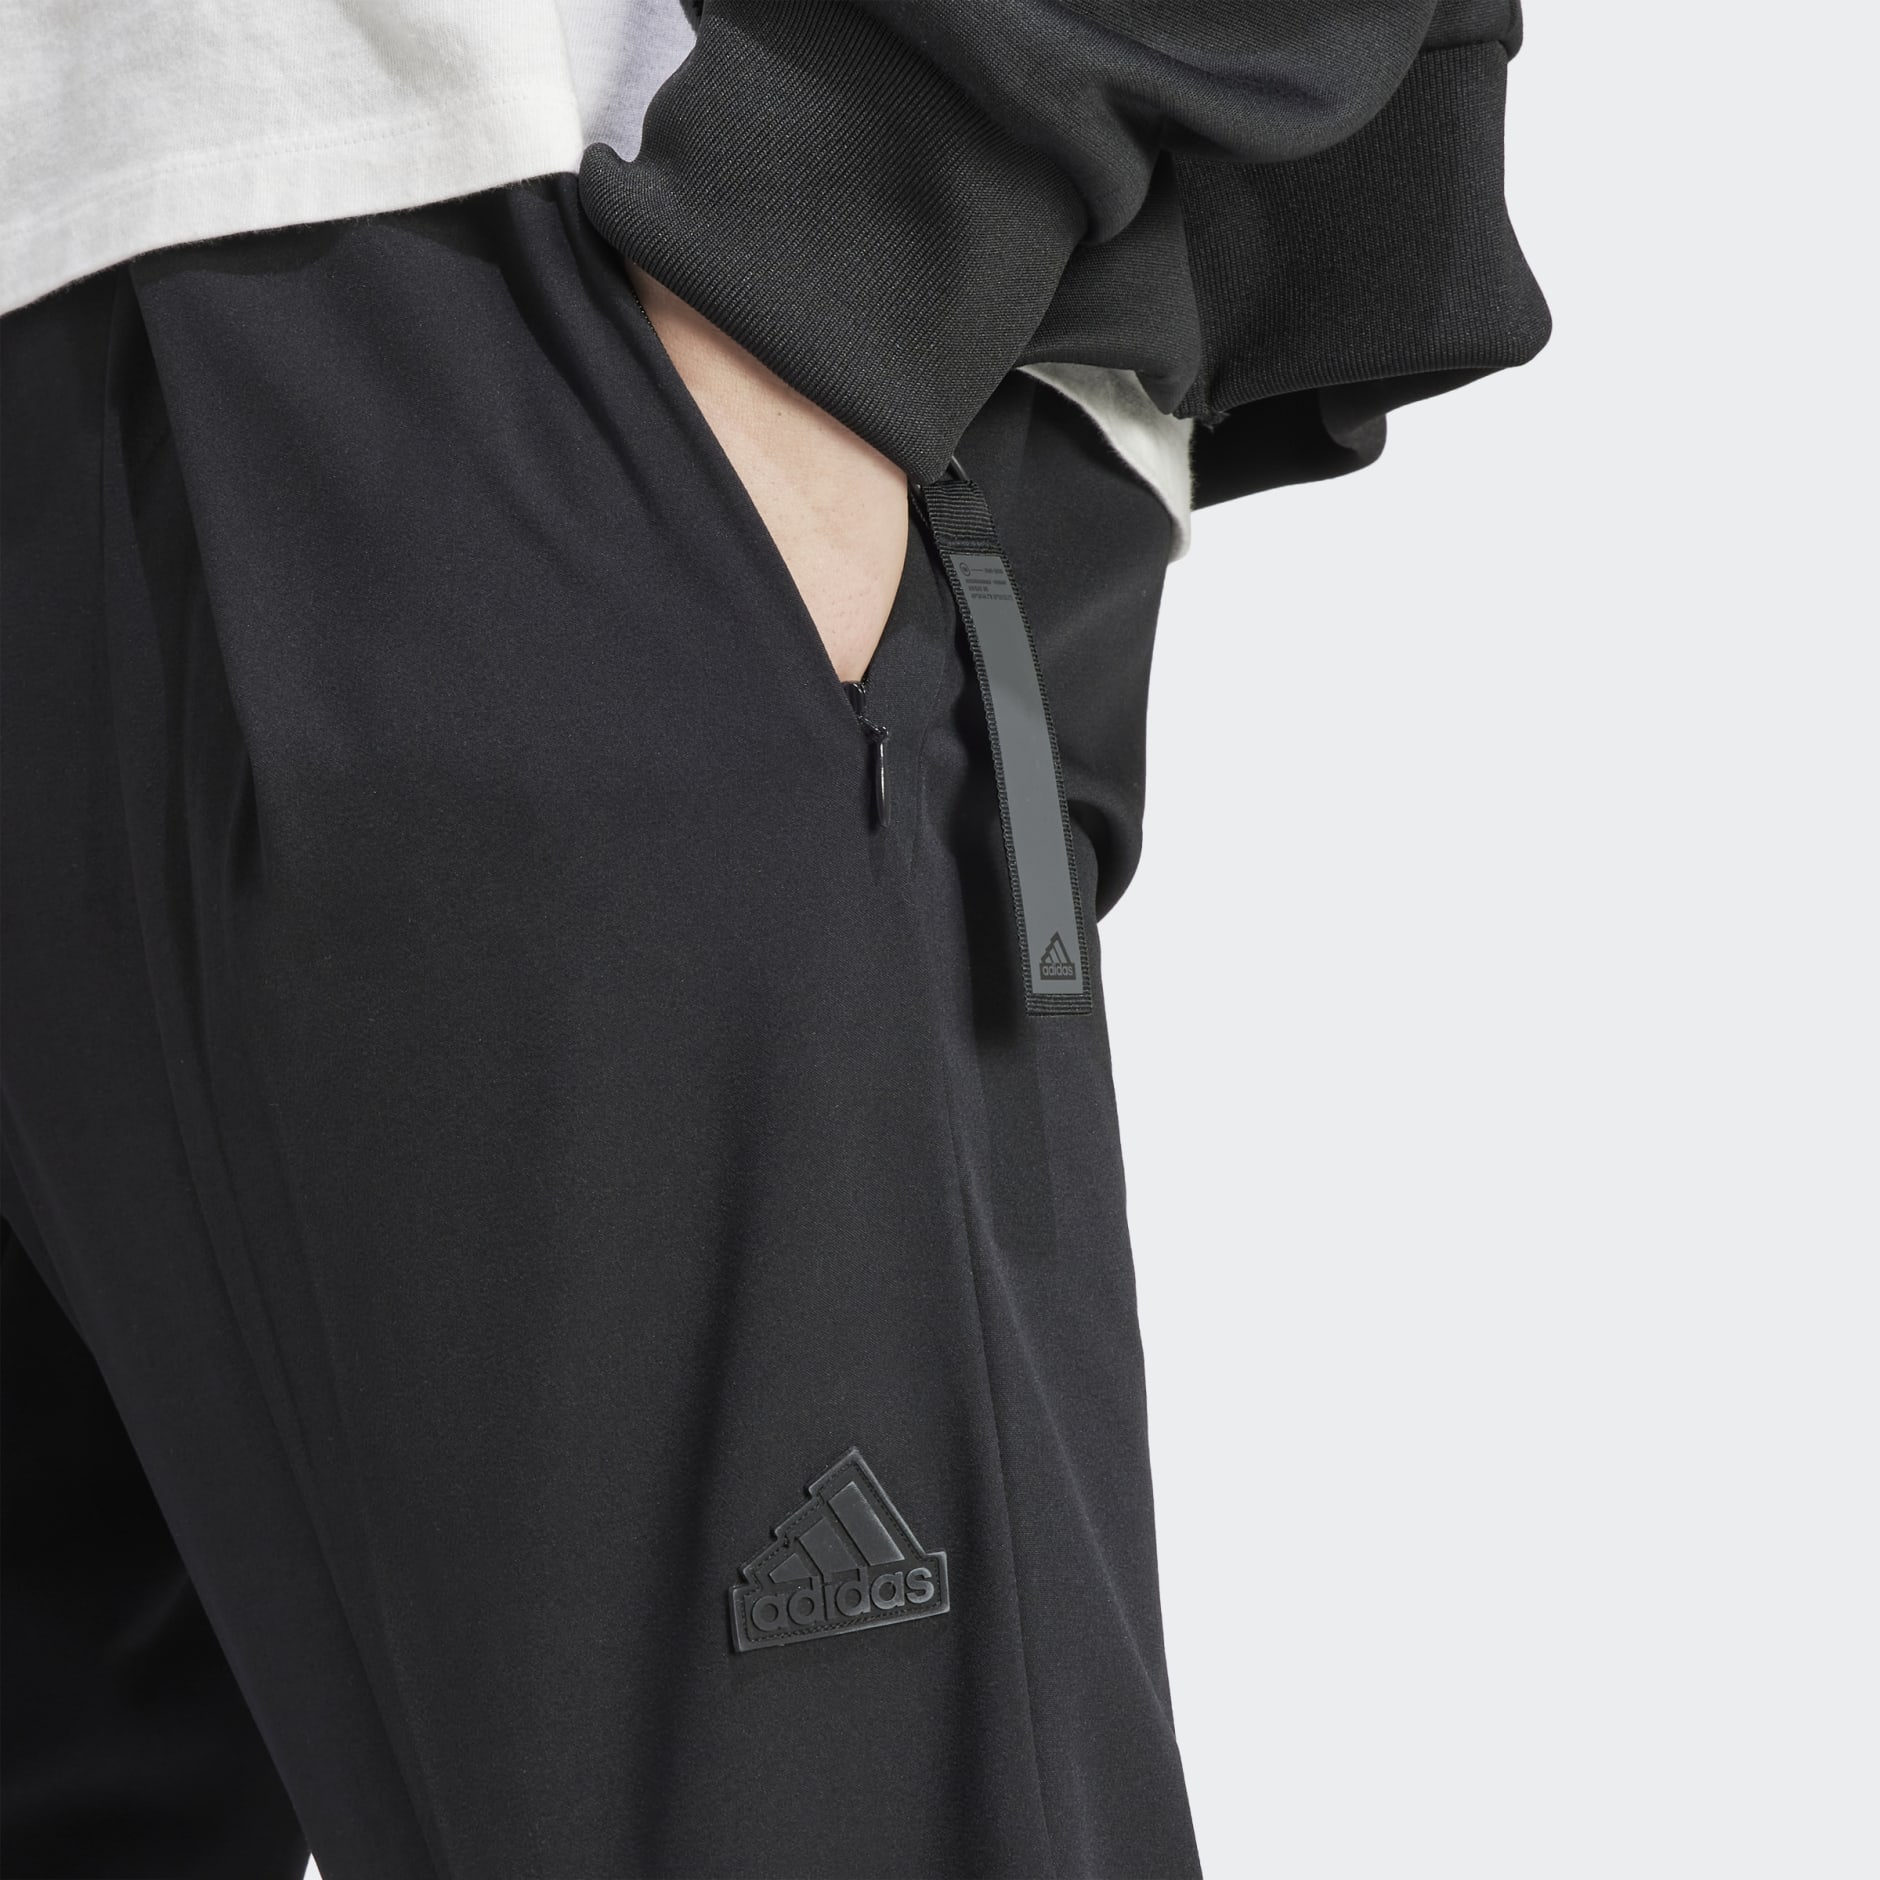 Clothing - City Escape Pants - Black | adidas South Africa